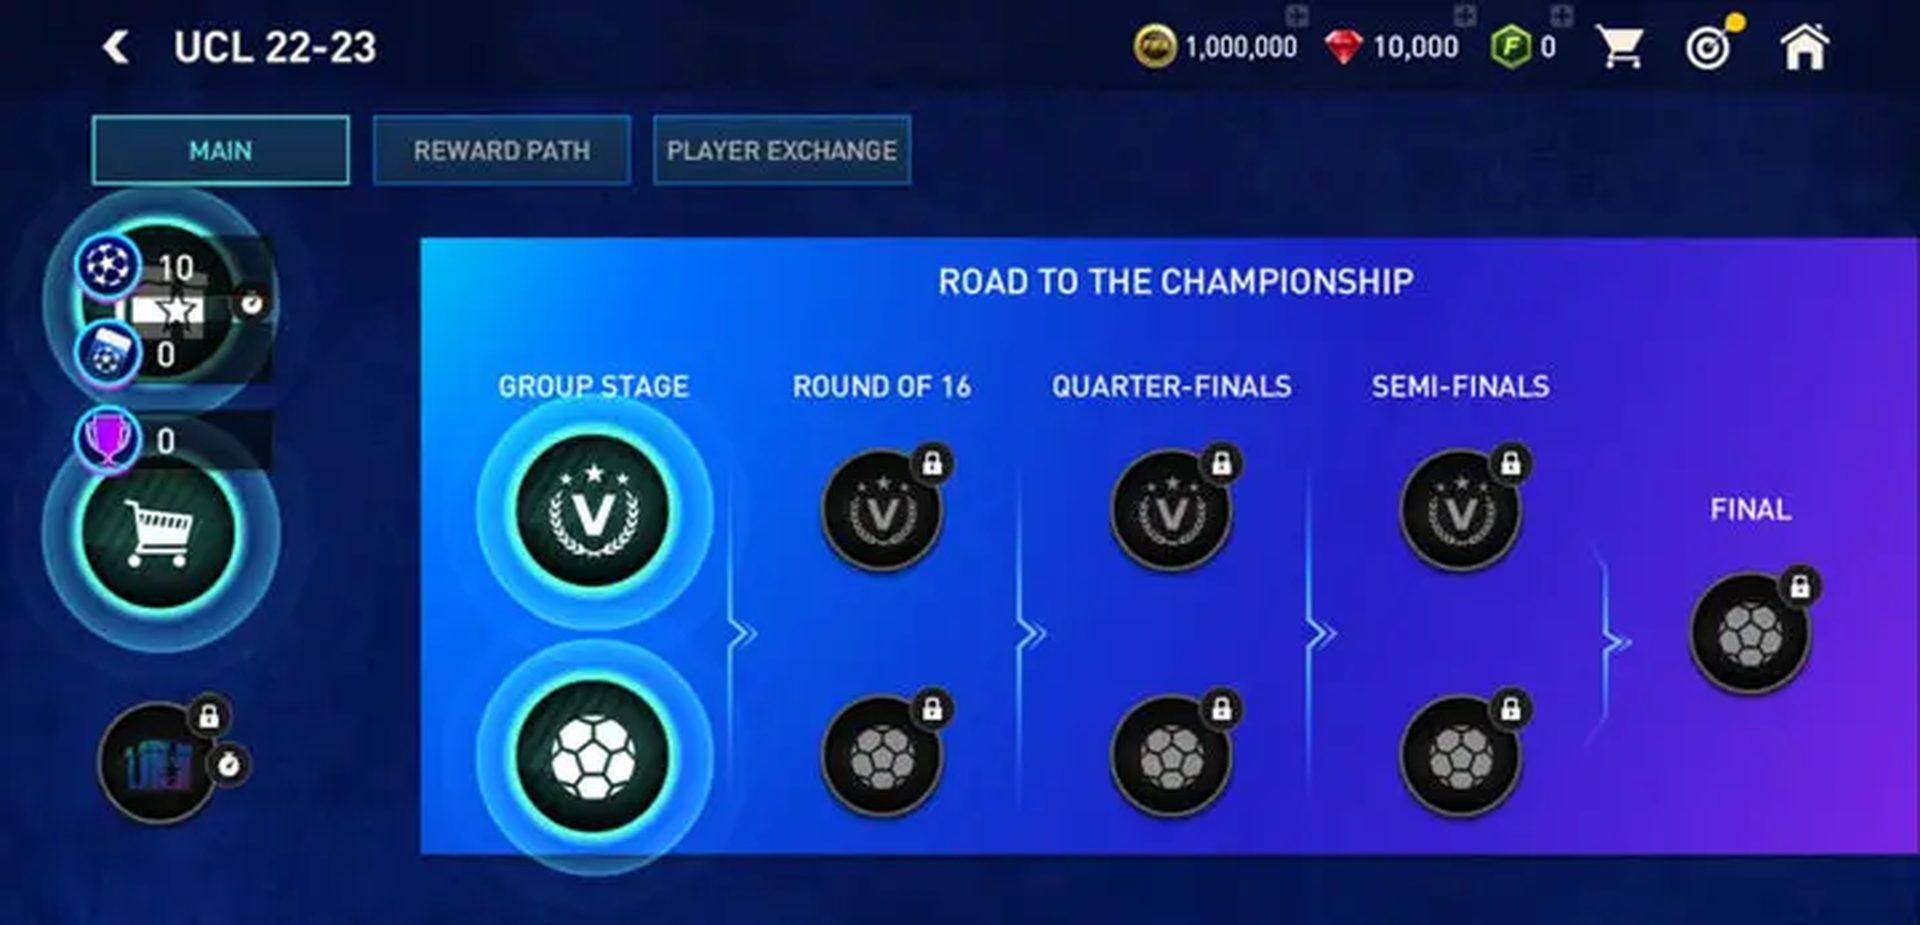 How to get UCL tokens in FIFA mobile?